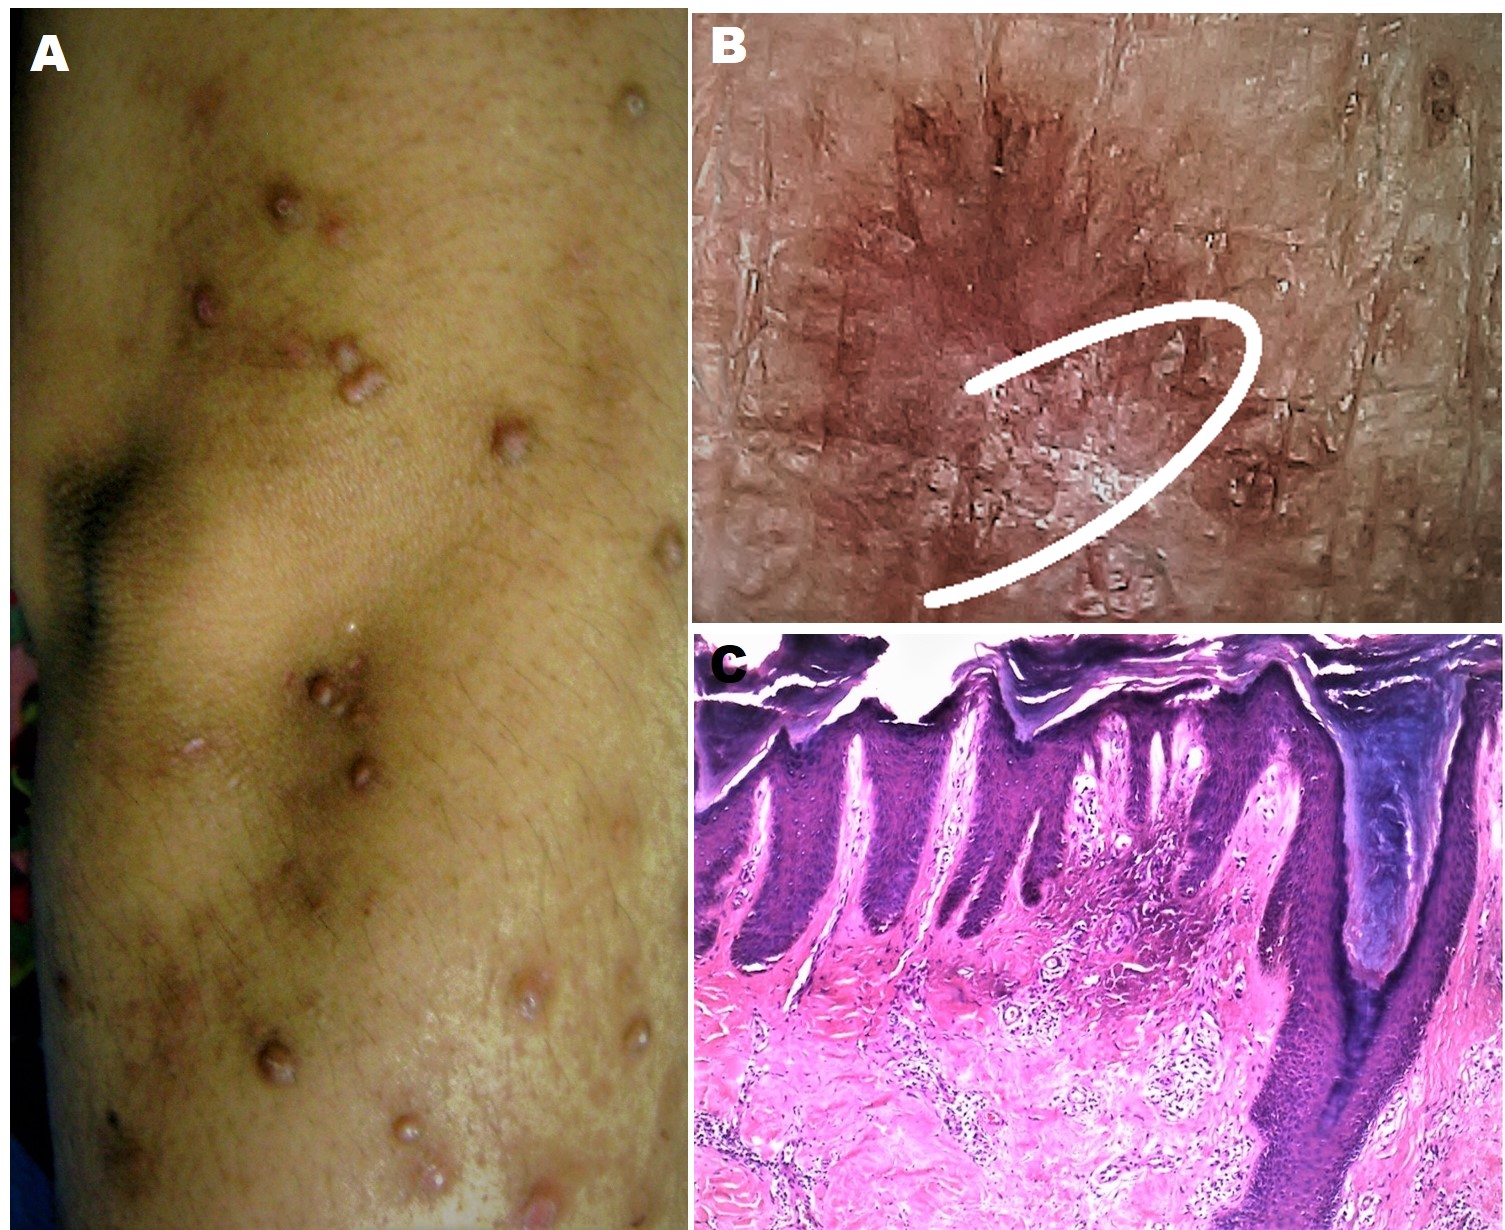 Figure 1 PRURIGO NODULARIS involving the limbs of a 65-year old lady: A, Clinical Image showing the typical hyperpigmented papules and nodules over the right upper extremity with excoriations; B, Polarized dermoscopic image from a papule showing an irregularly-shaped large reddish-brown clod with localized white structureless area (white arc), with interspersed red and brown colored dots and pigmented granules [Escope, USB Videodermoscope, 30X; Timpac Healthcare Pvt